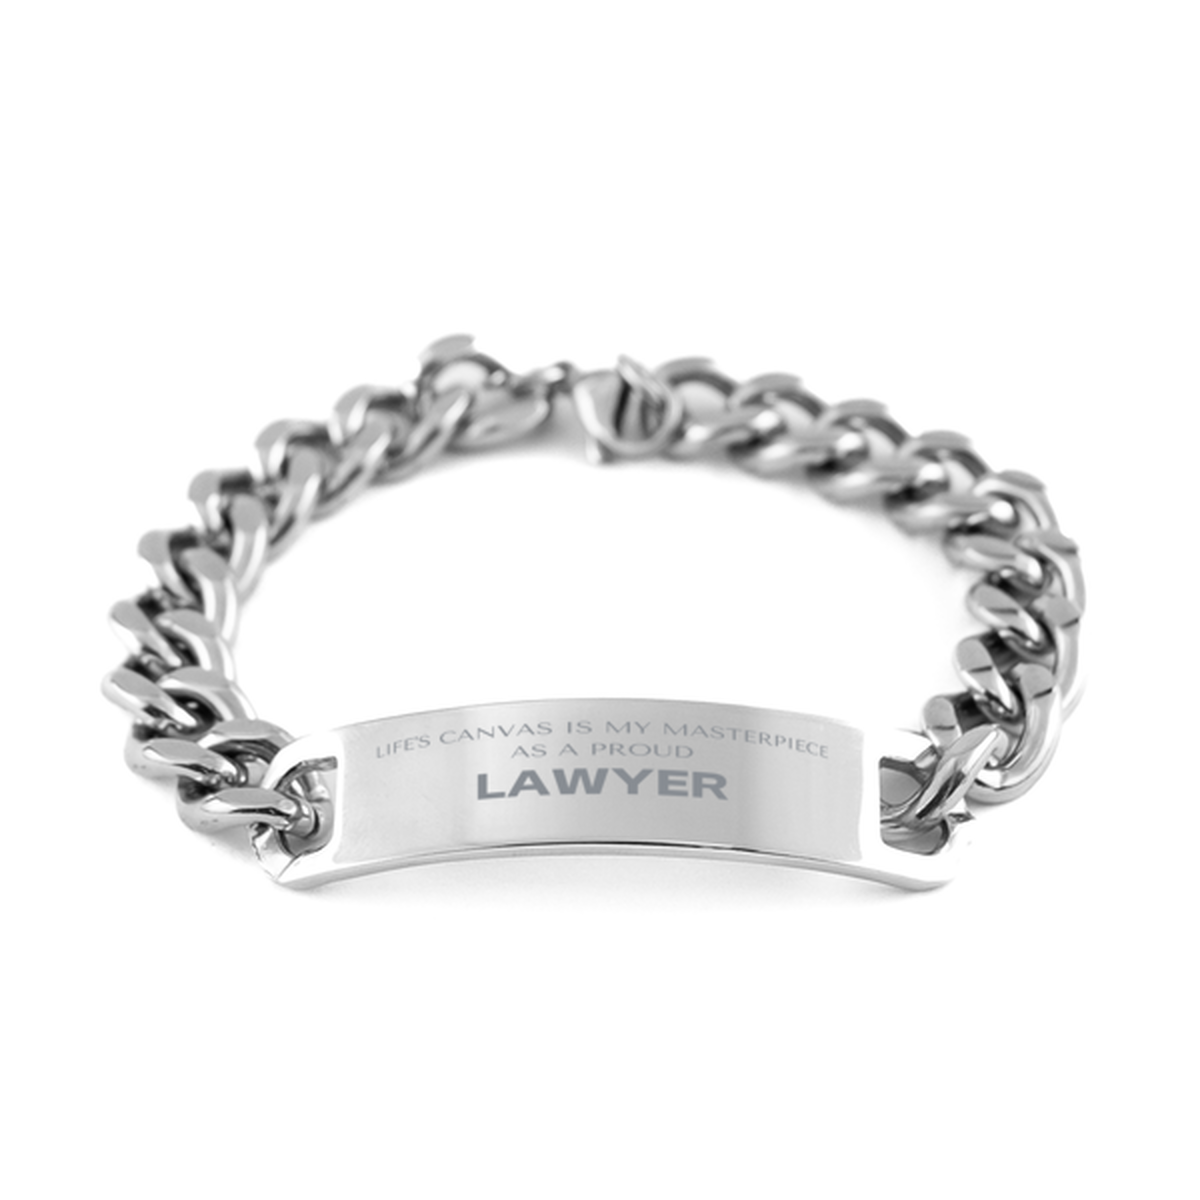 Proud Lawyer Gifts, Life's canvas is my masterpiece, Epic Birthday Christmas Unique Cuban Chain Stainless Steel Bracelet For Lawyer, Coworkers, Men, Women, Friends